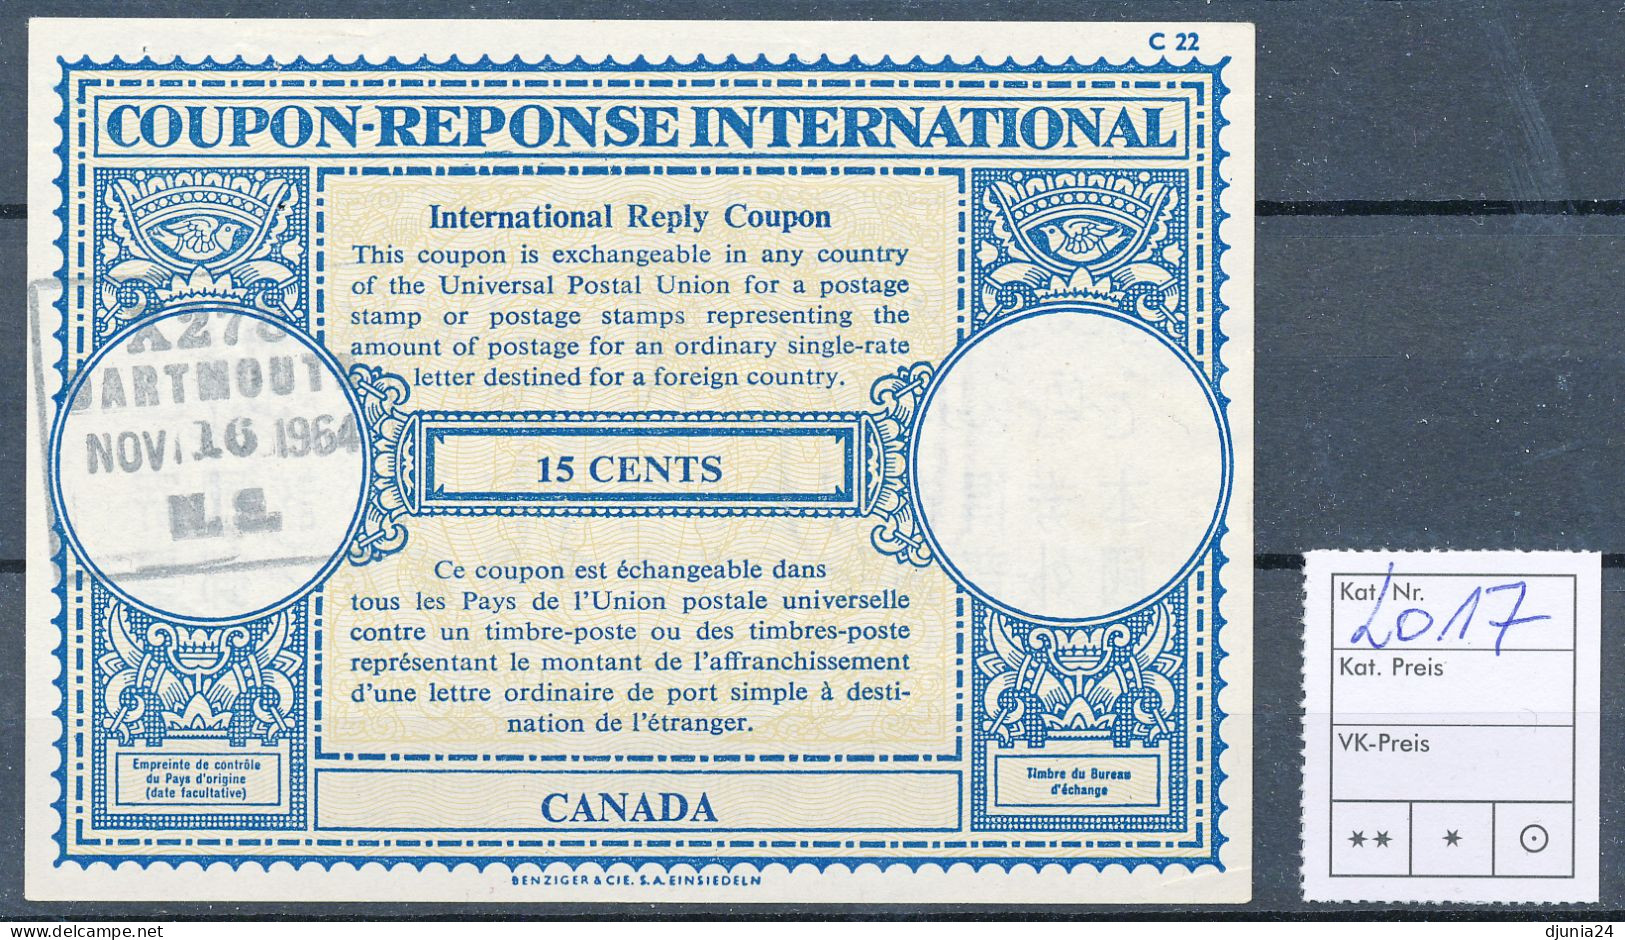 BF0363 / CANADA / KANADA - collection of 22 different reply coupon reponse